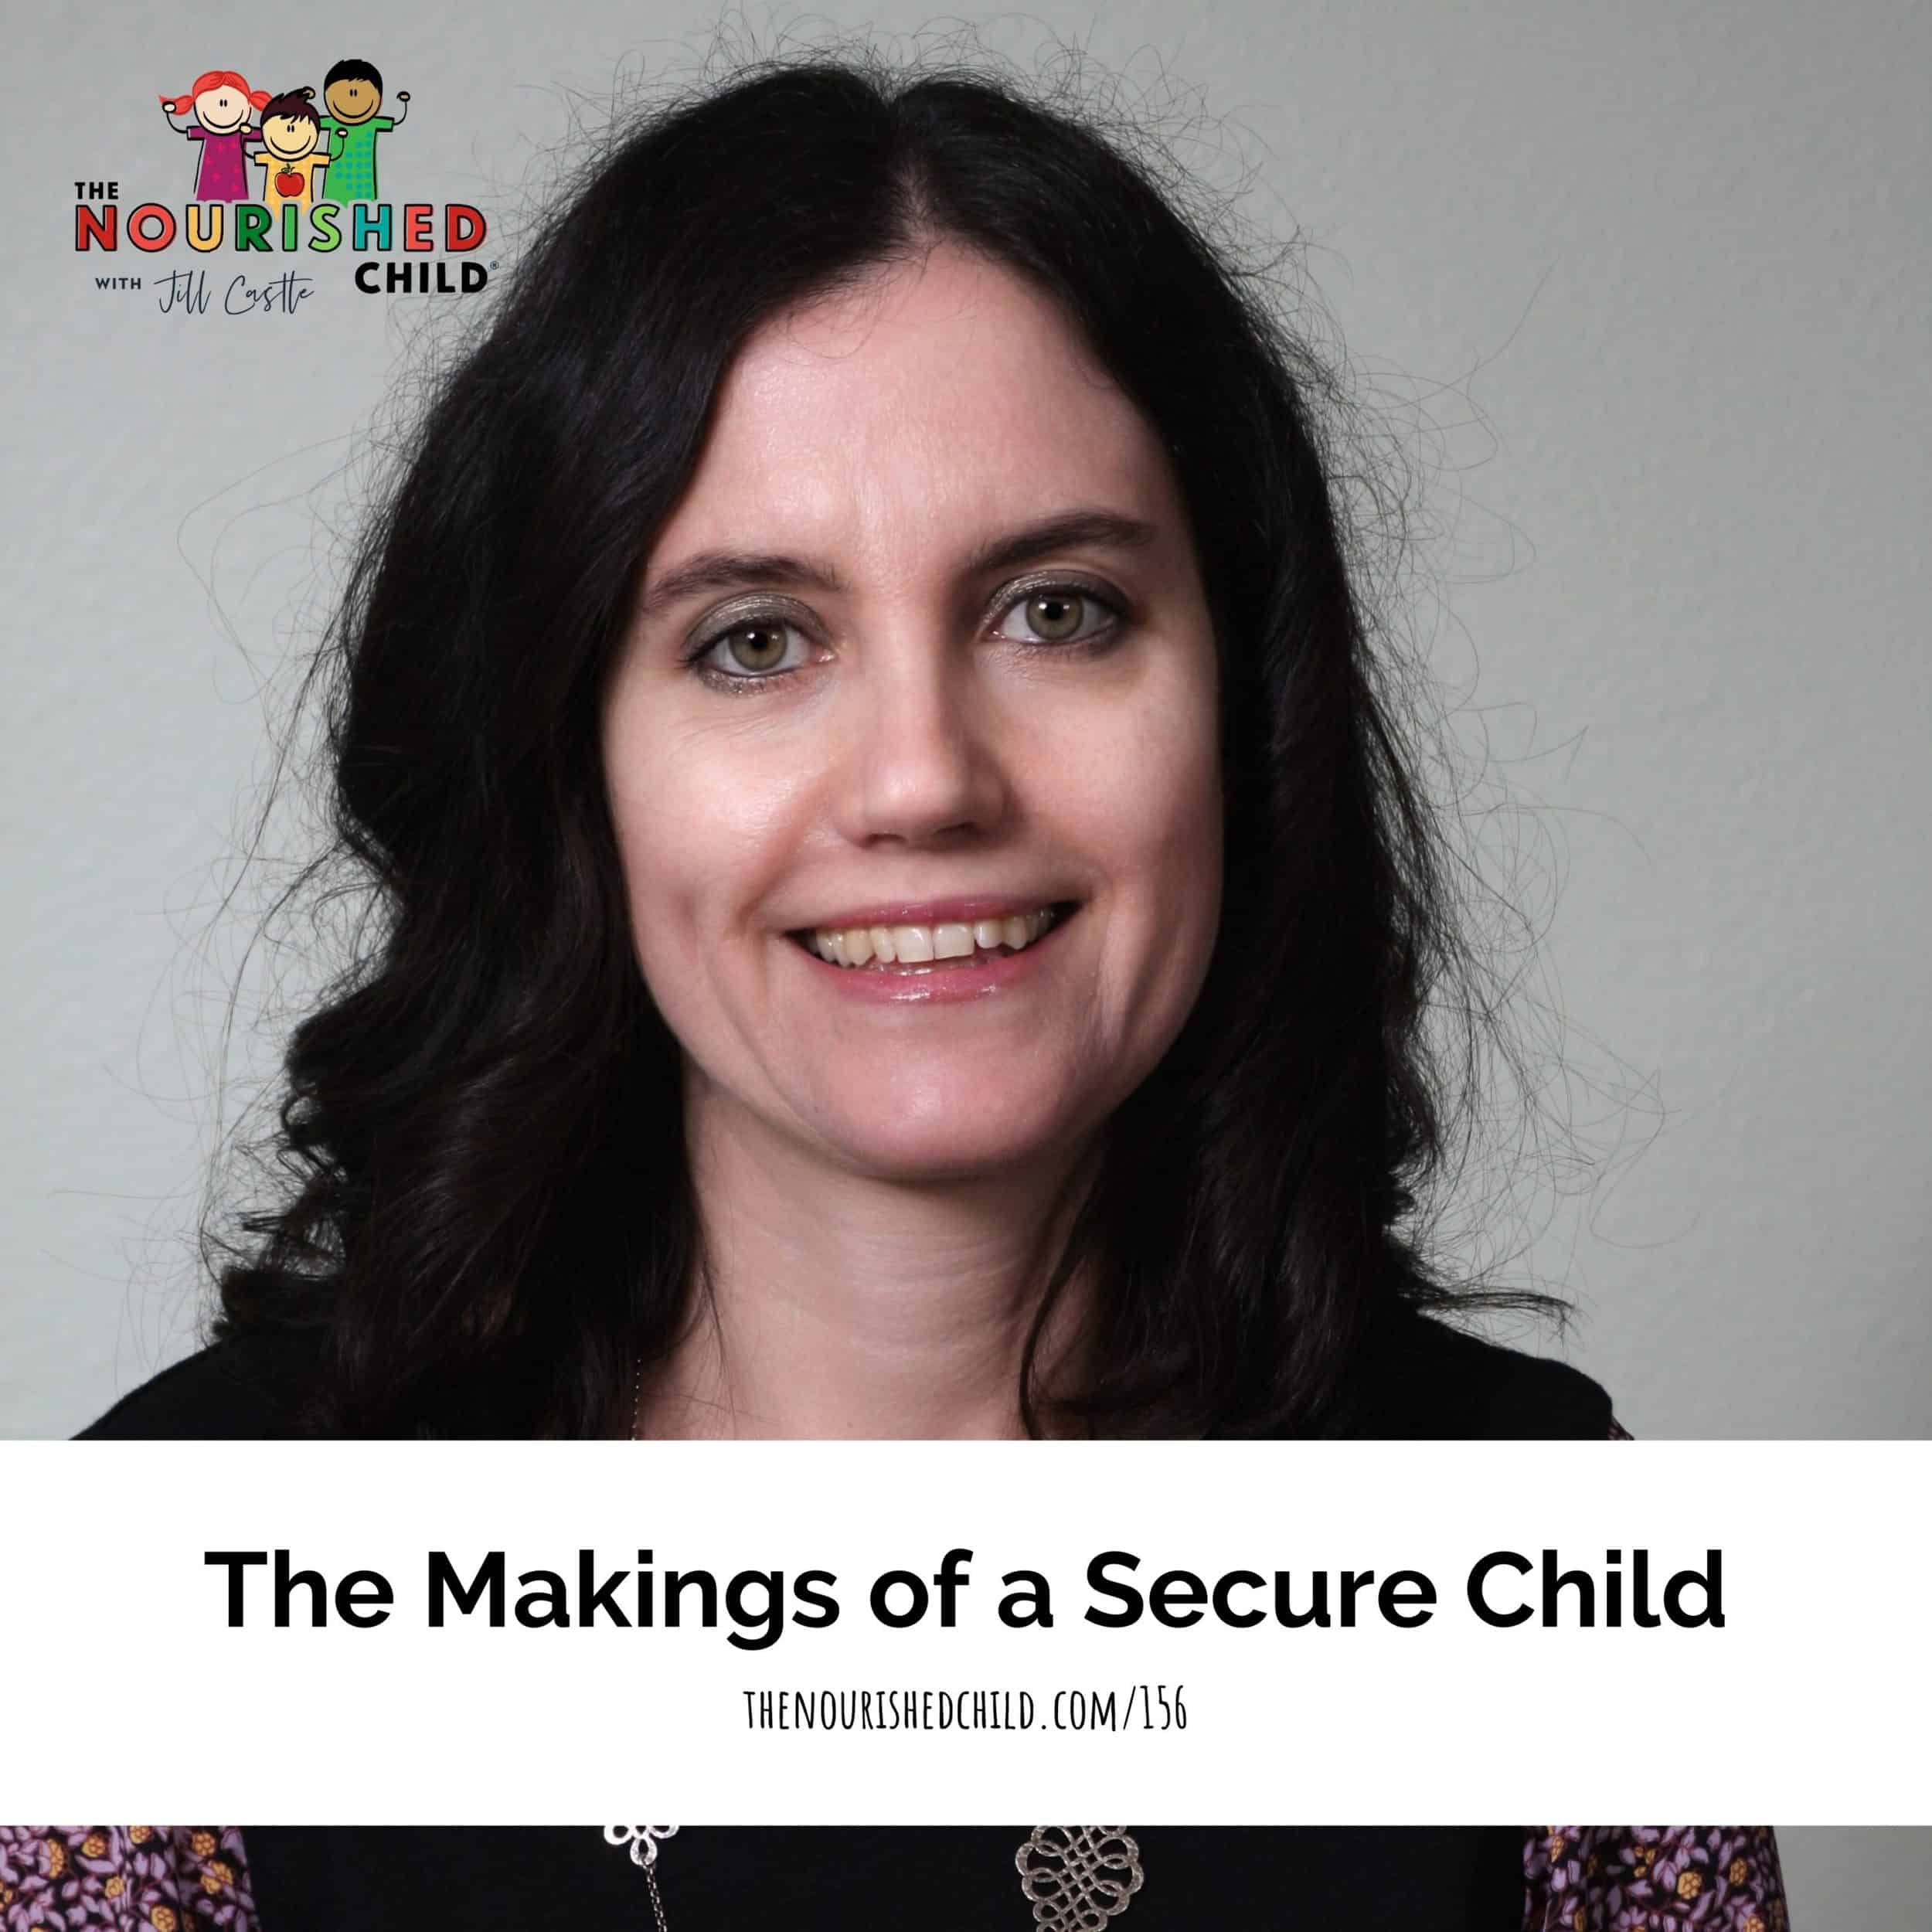 Serena Messina on The Nourished Child podcast